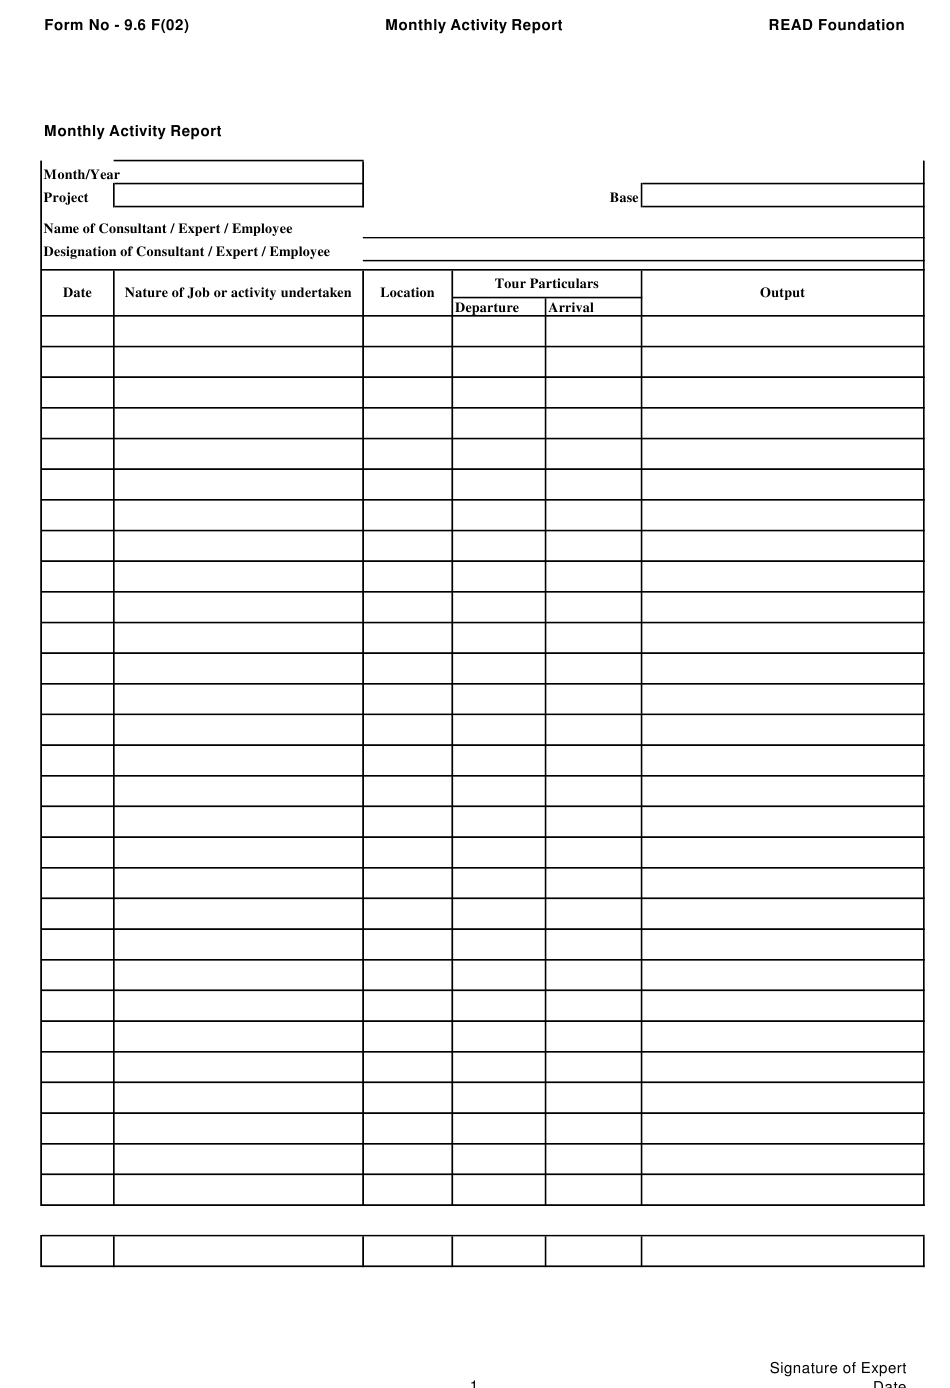 Monthly Activity Report Template Download Printable PDF